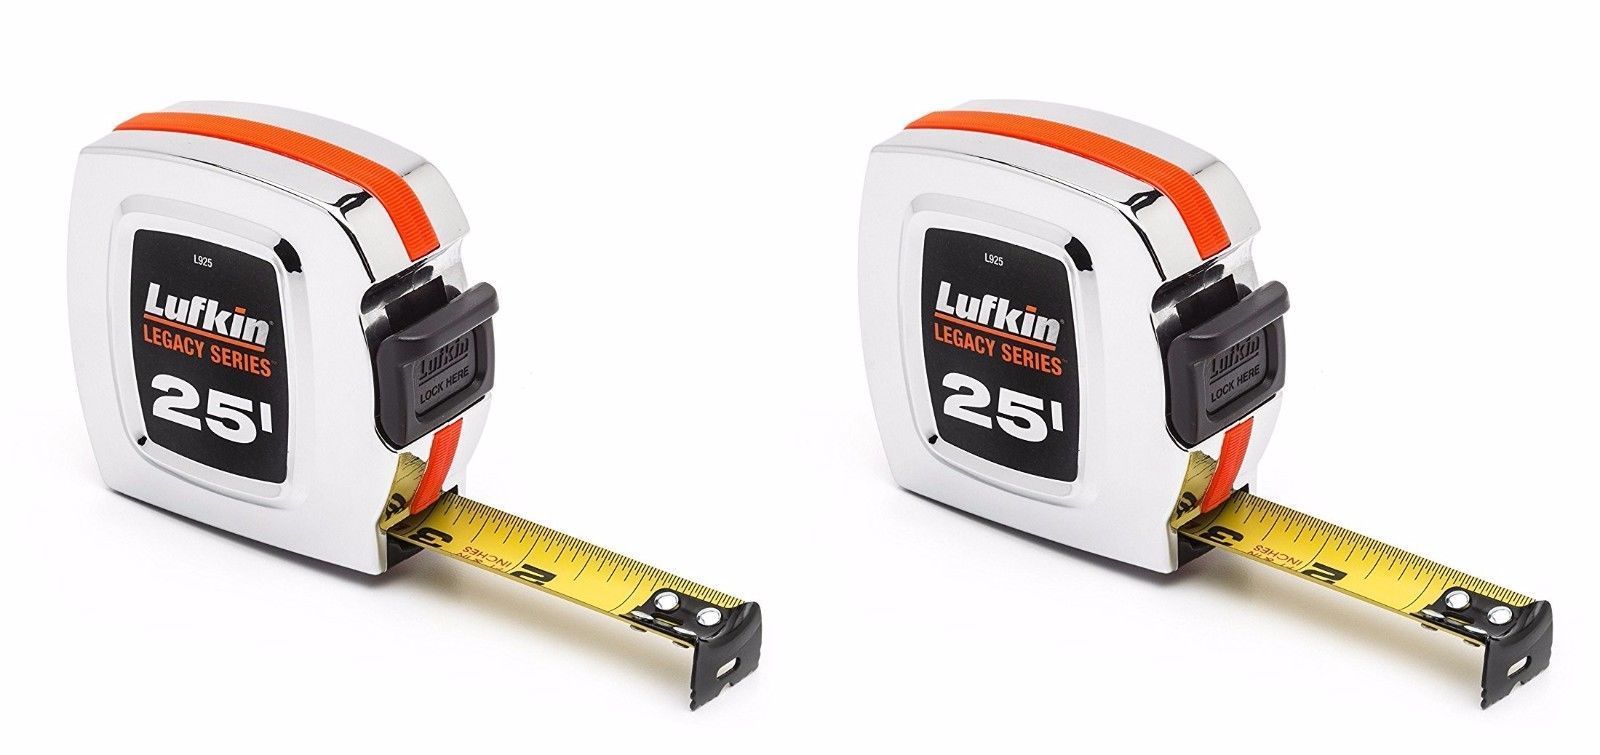 2 NEW Lufkin 25' Tape Measure 1" Legacy Series L925 Professional Large Numbers